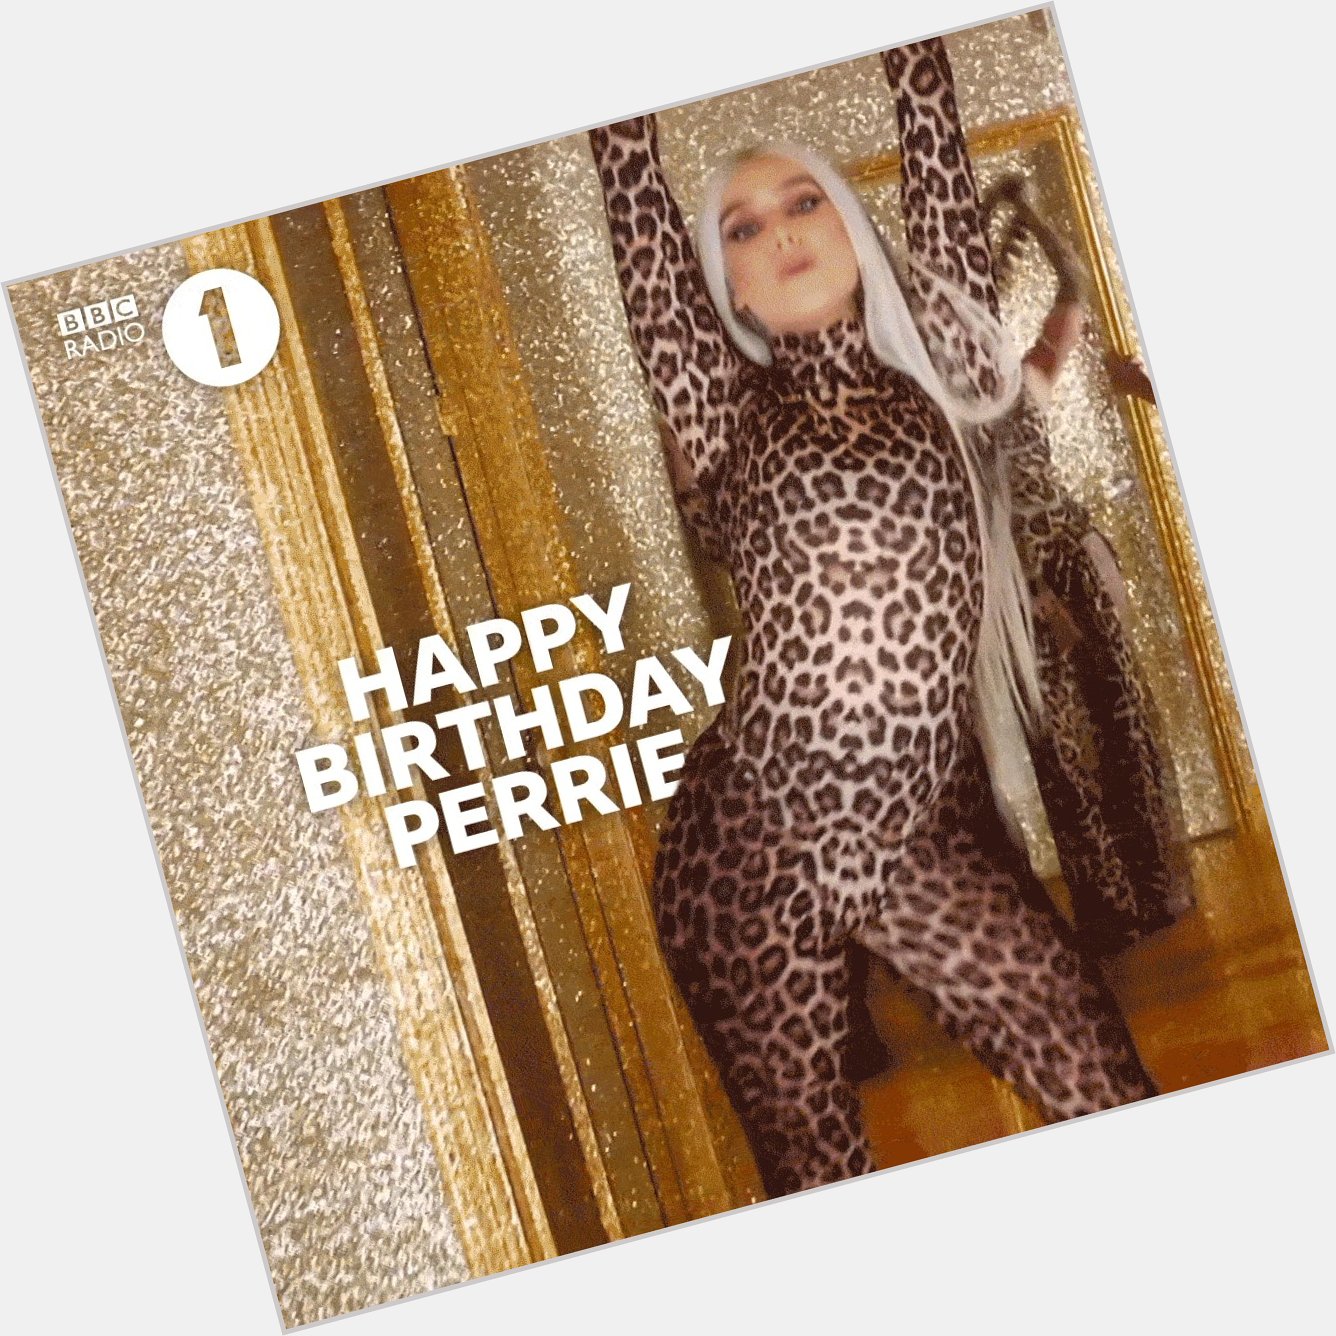  Happy Birthday to Perrie Edwards!   